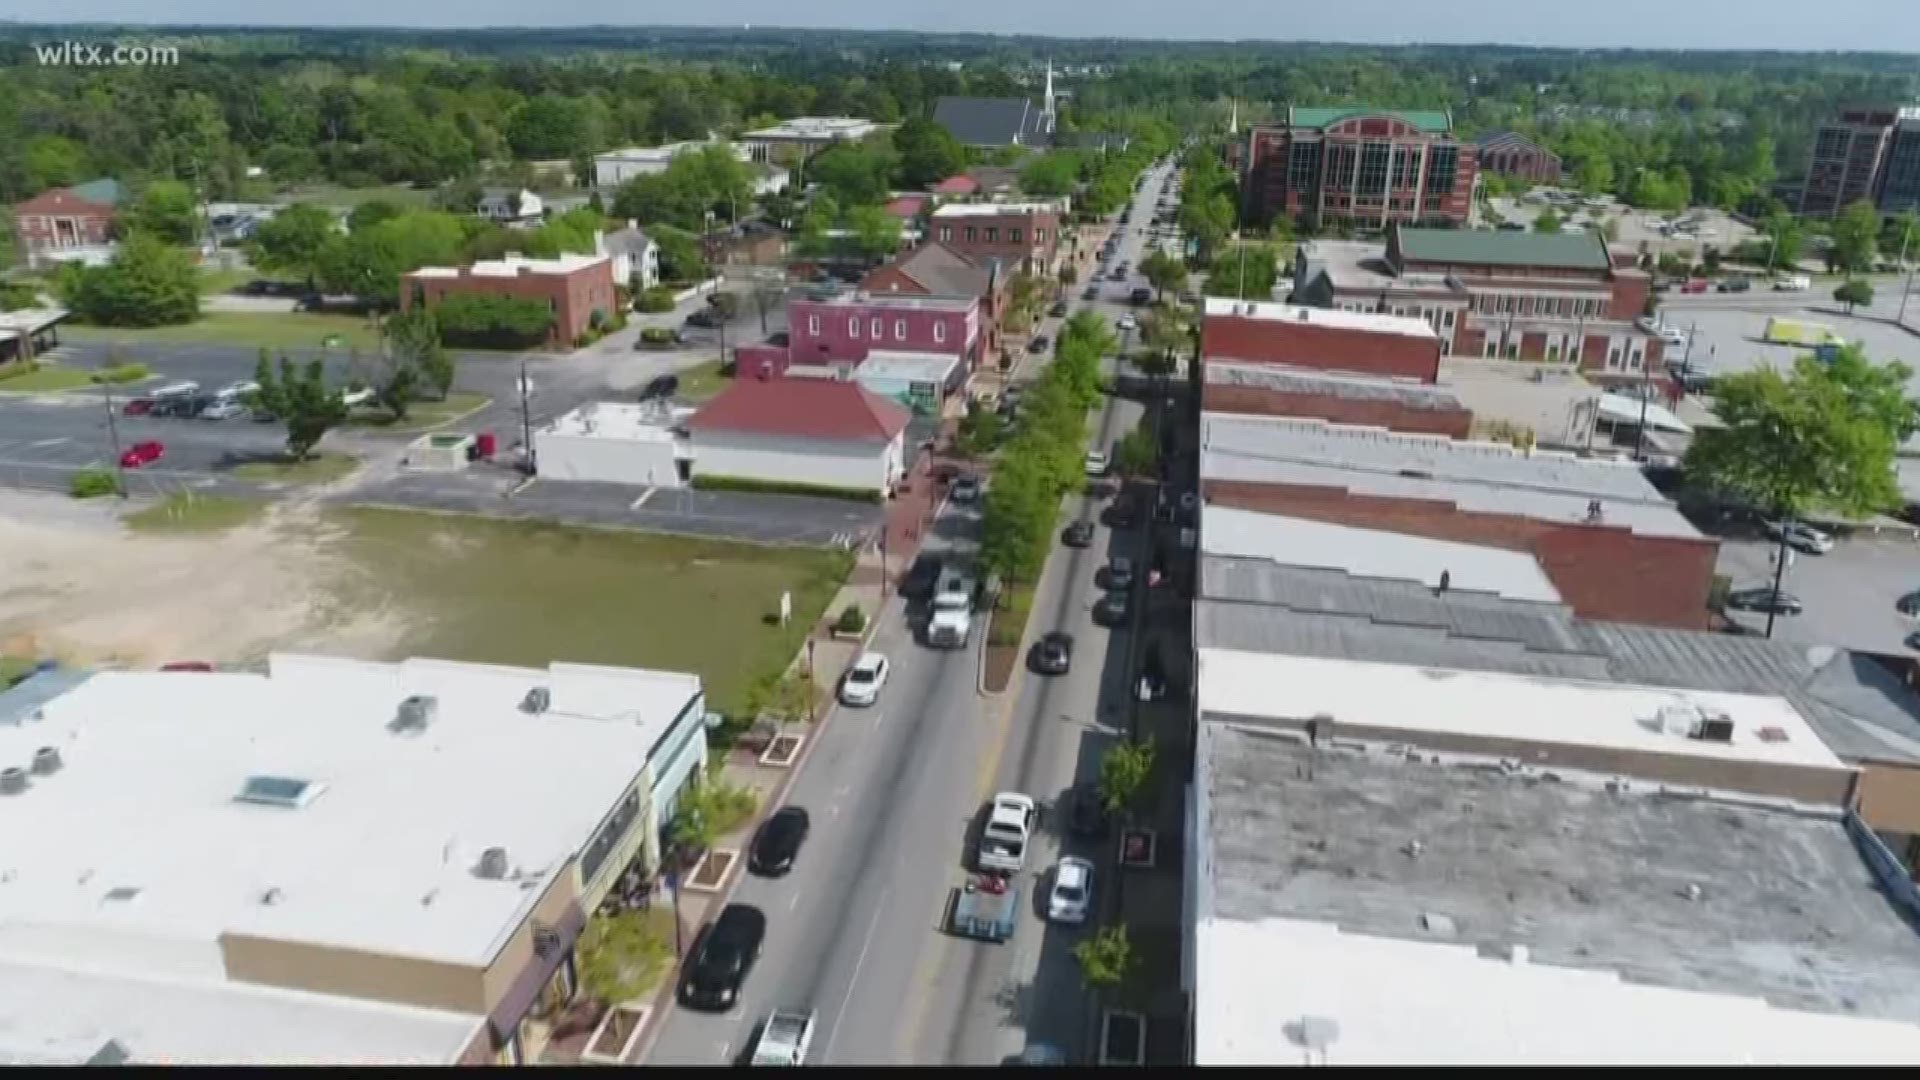 The town of Lexington's growth over the past year will be the focus of tonight's State of the Town address.